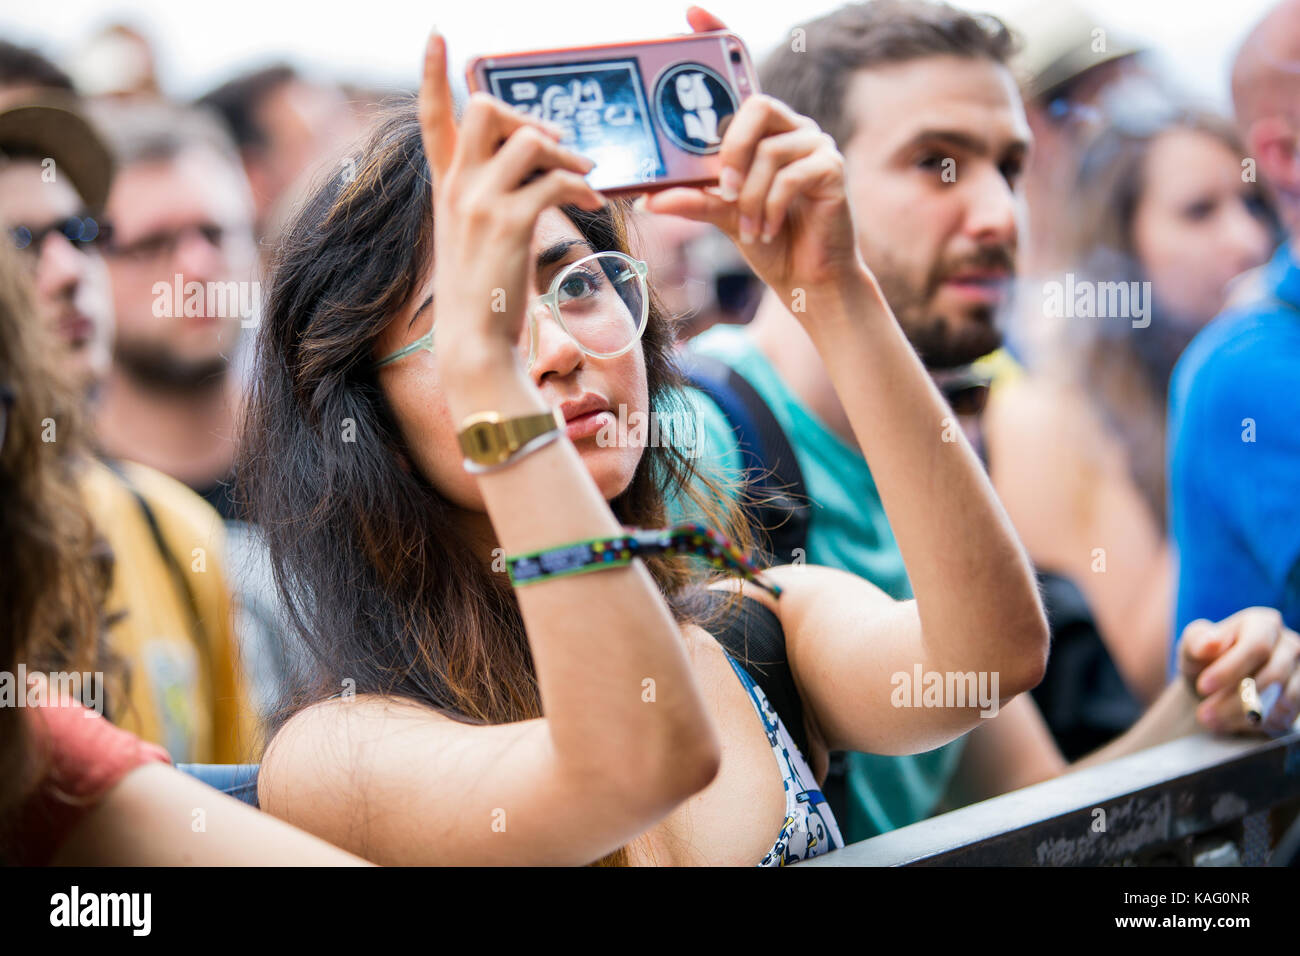 A concert-goer takes a photo with her smart phone at a live concert at the Spanish music festival Primavera Sound 2016 in Barcelona. Spain, 04/06 2016. Stock Photo